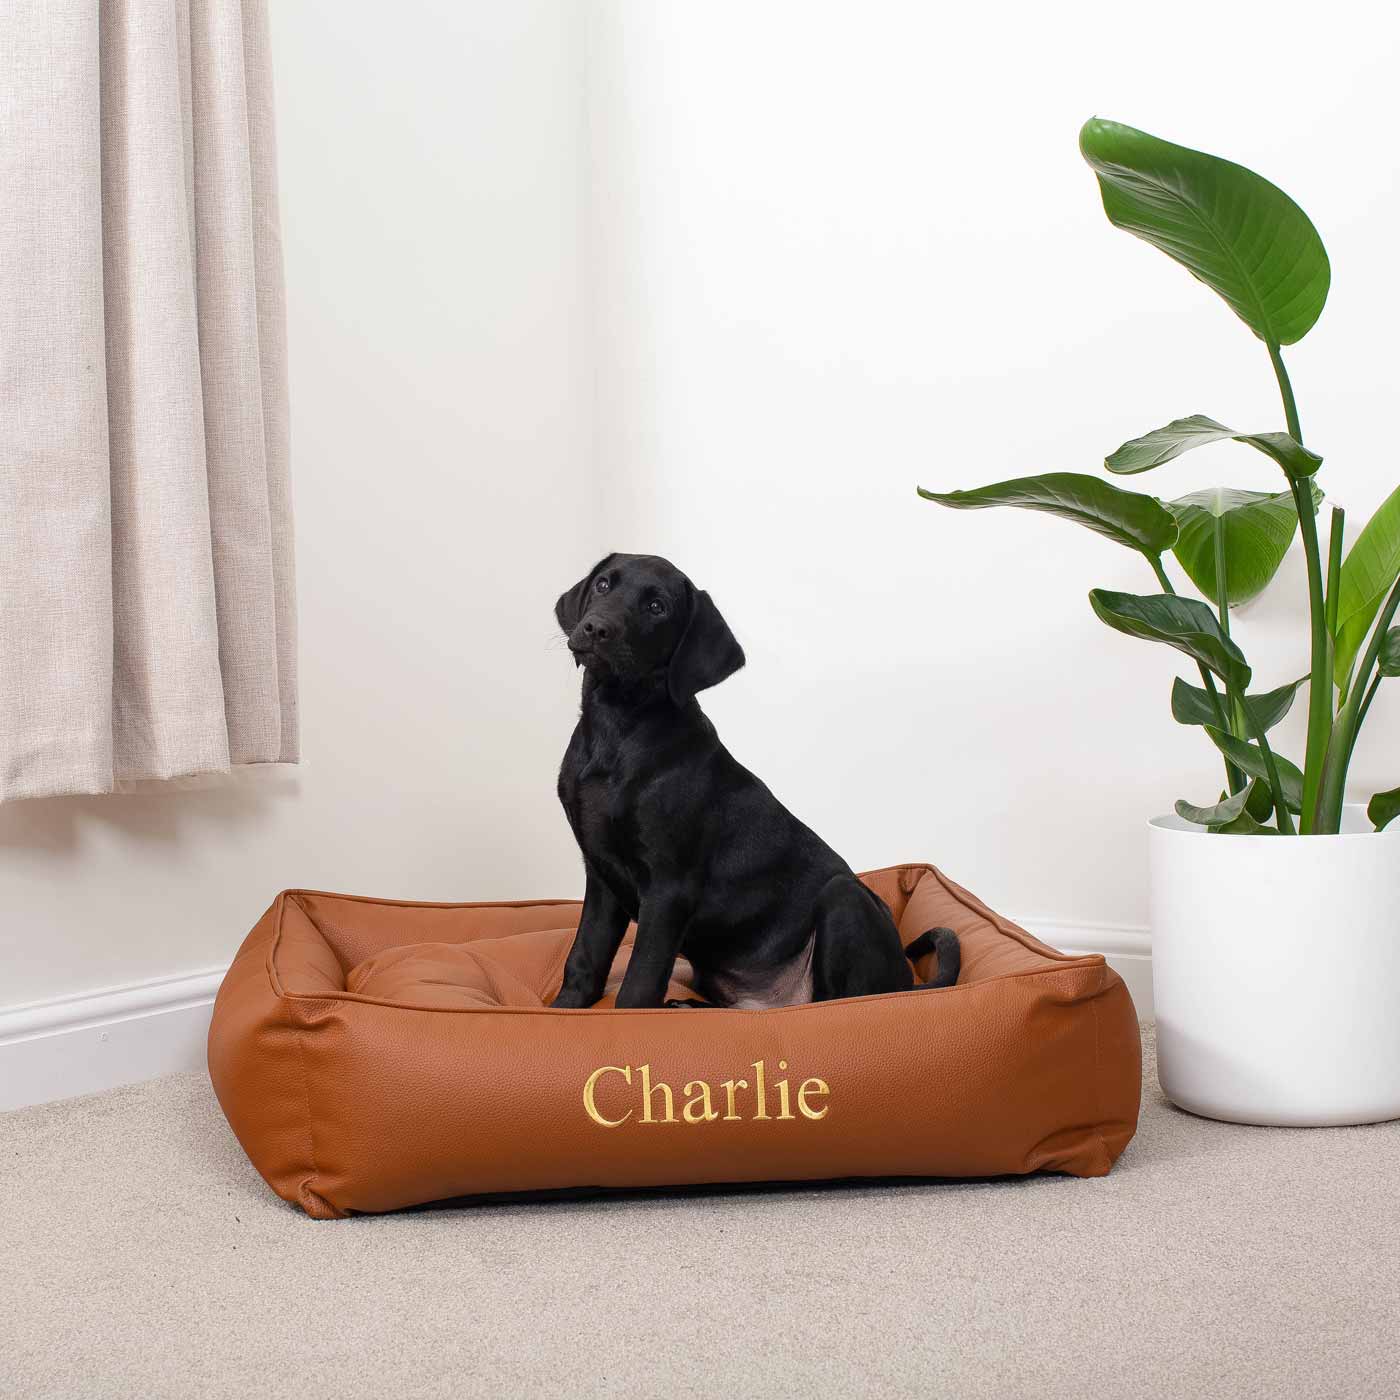  Luxury Handmade Box Bed in Rhino Tough Desert Faux Leather, in Ember, Perfect For Your Pets Nap Time! Available To Personalize at Lords & Labradors US